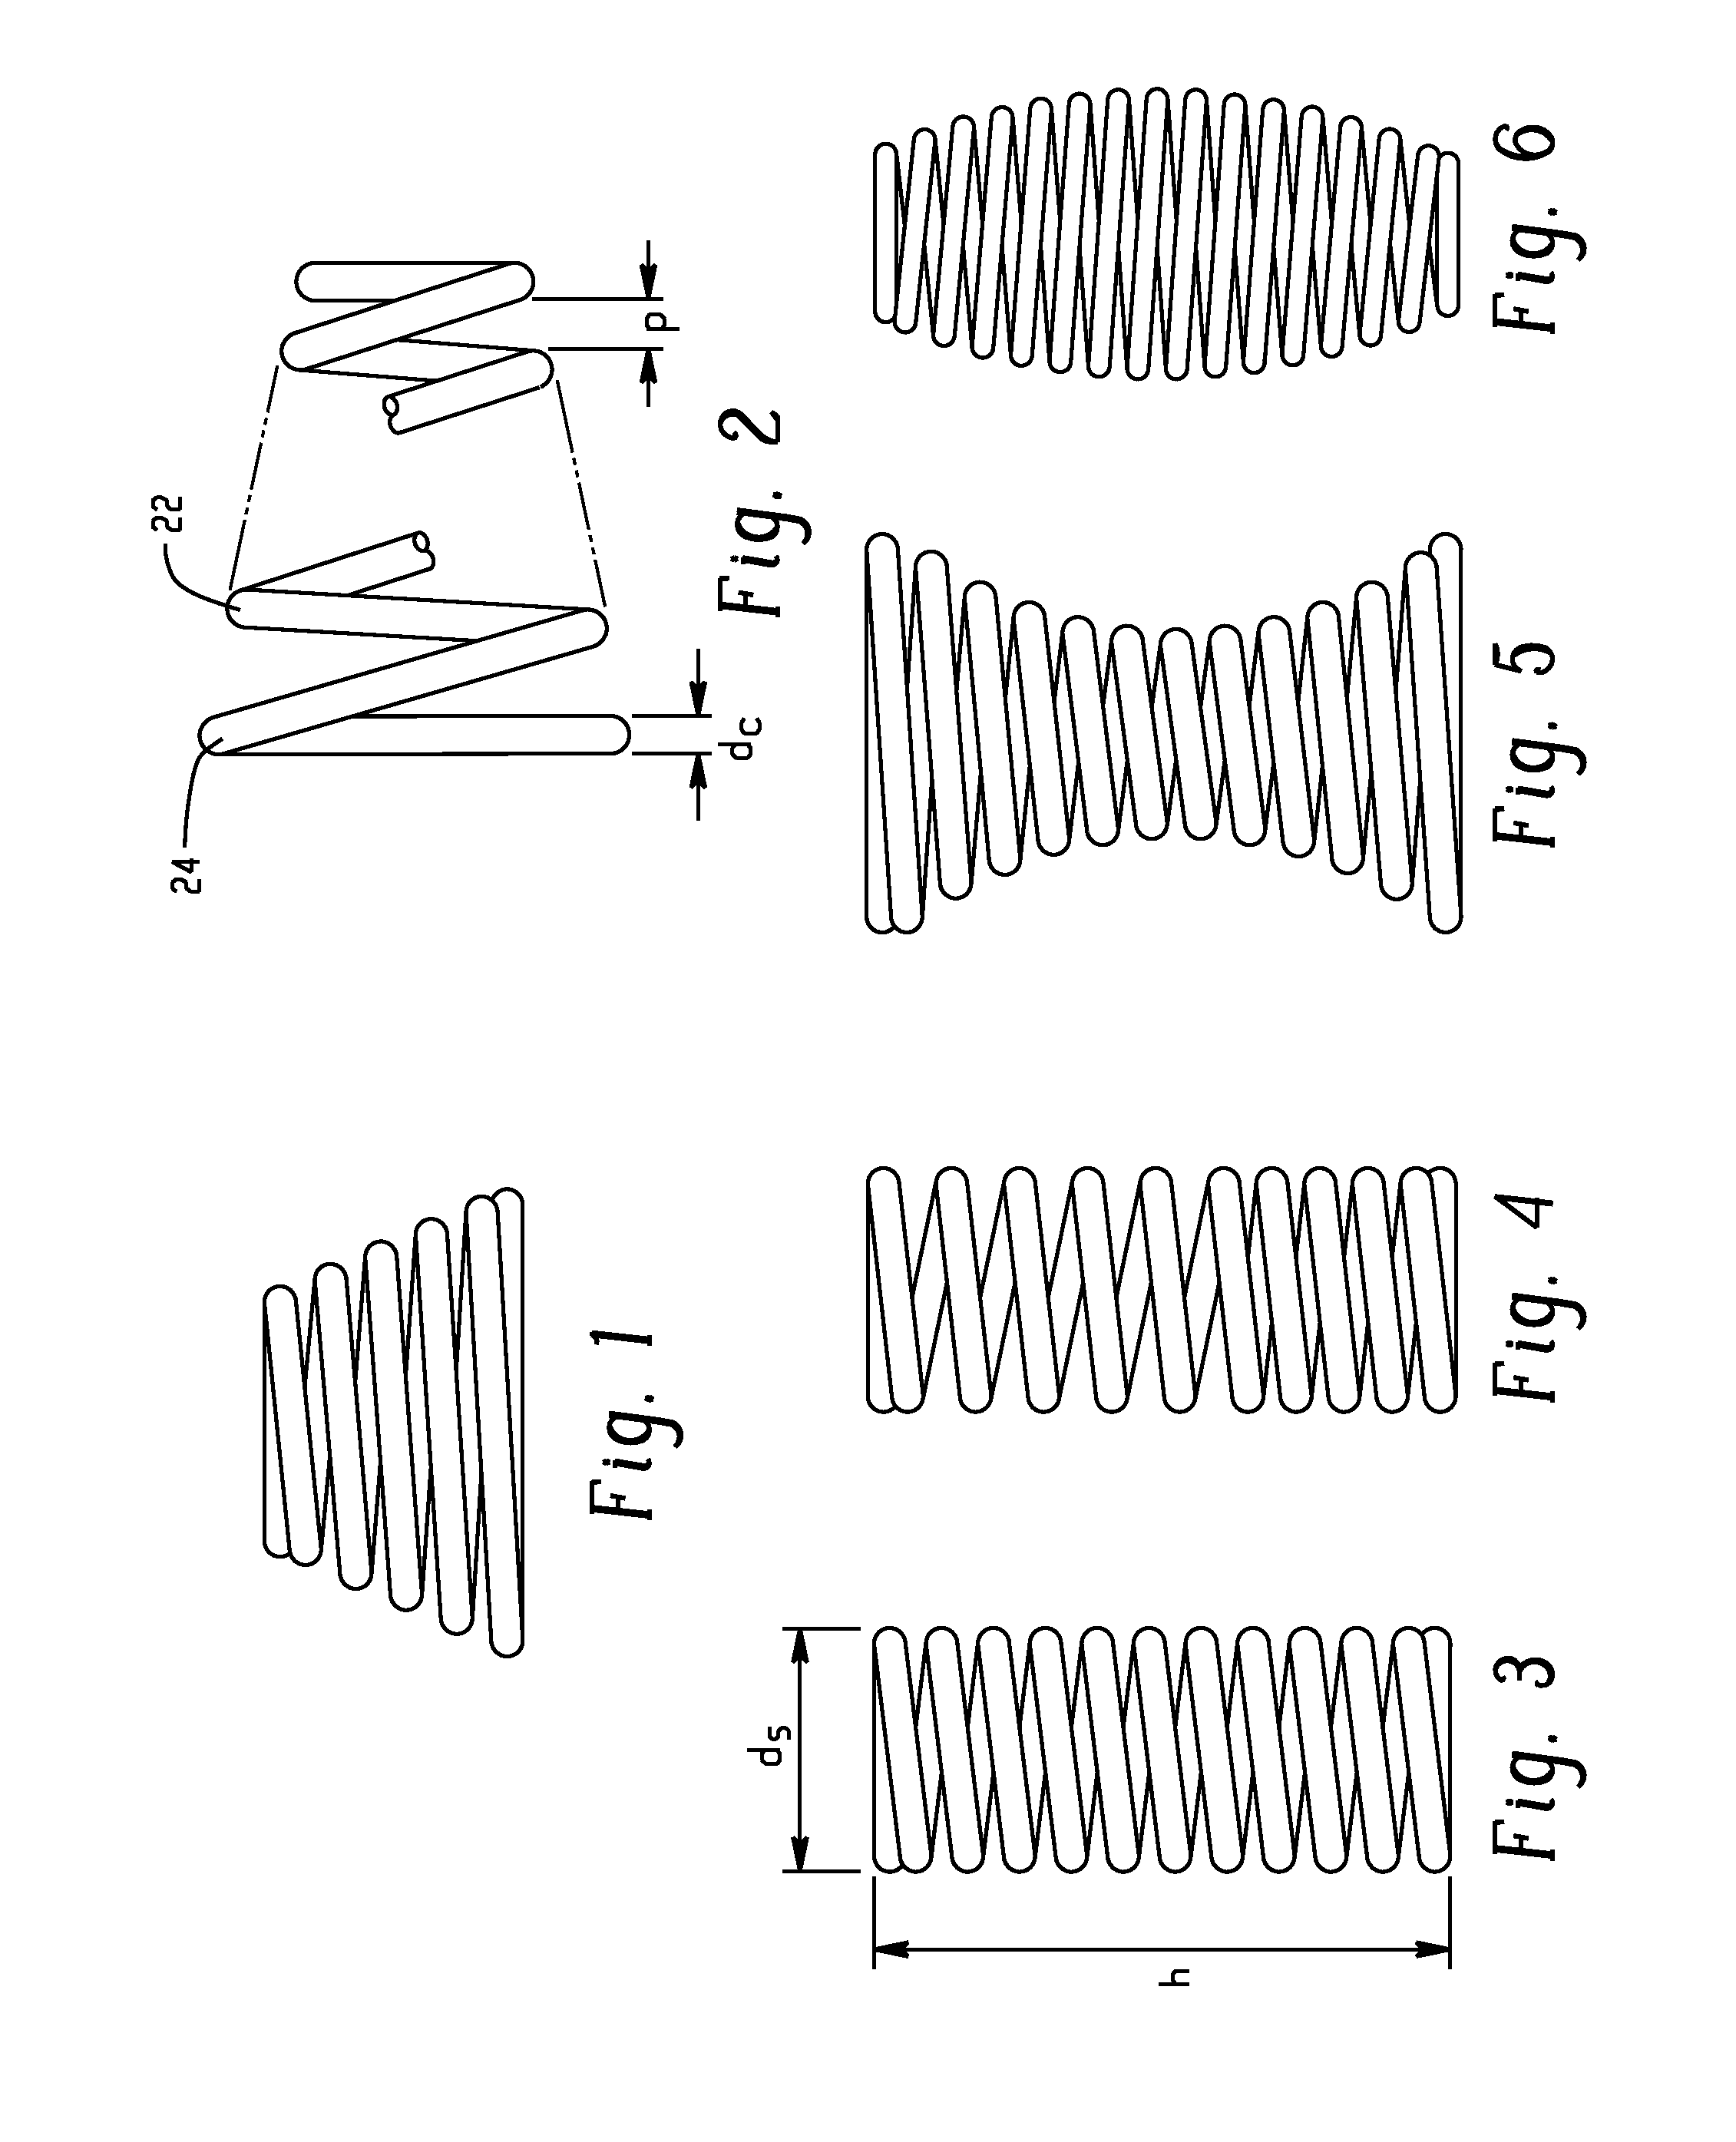 Plastically deformable coil energy absorber systems